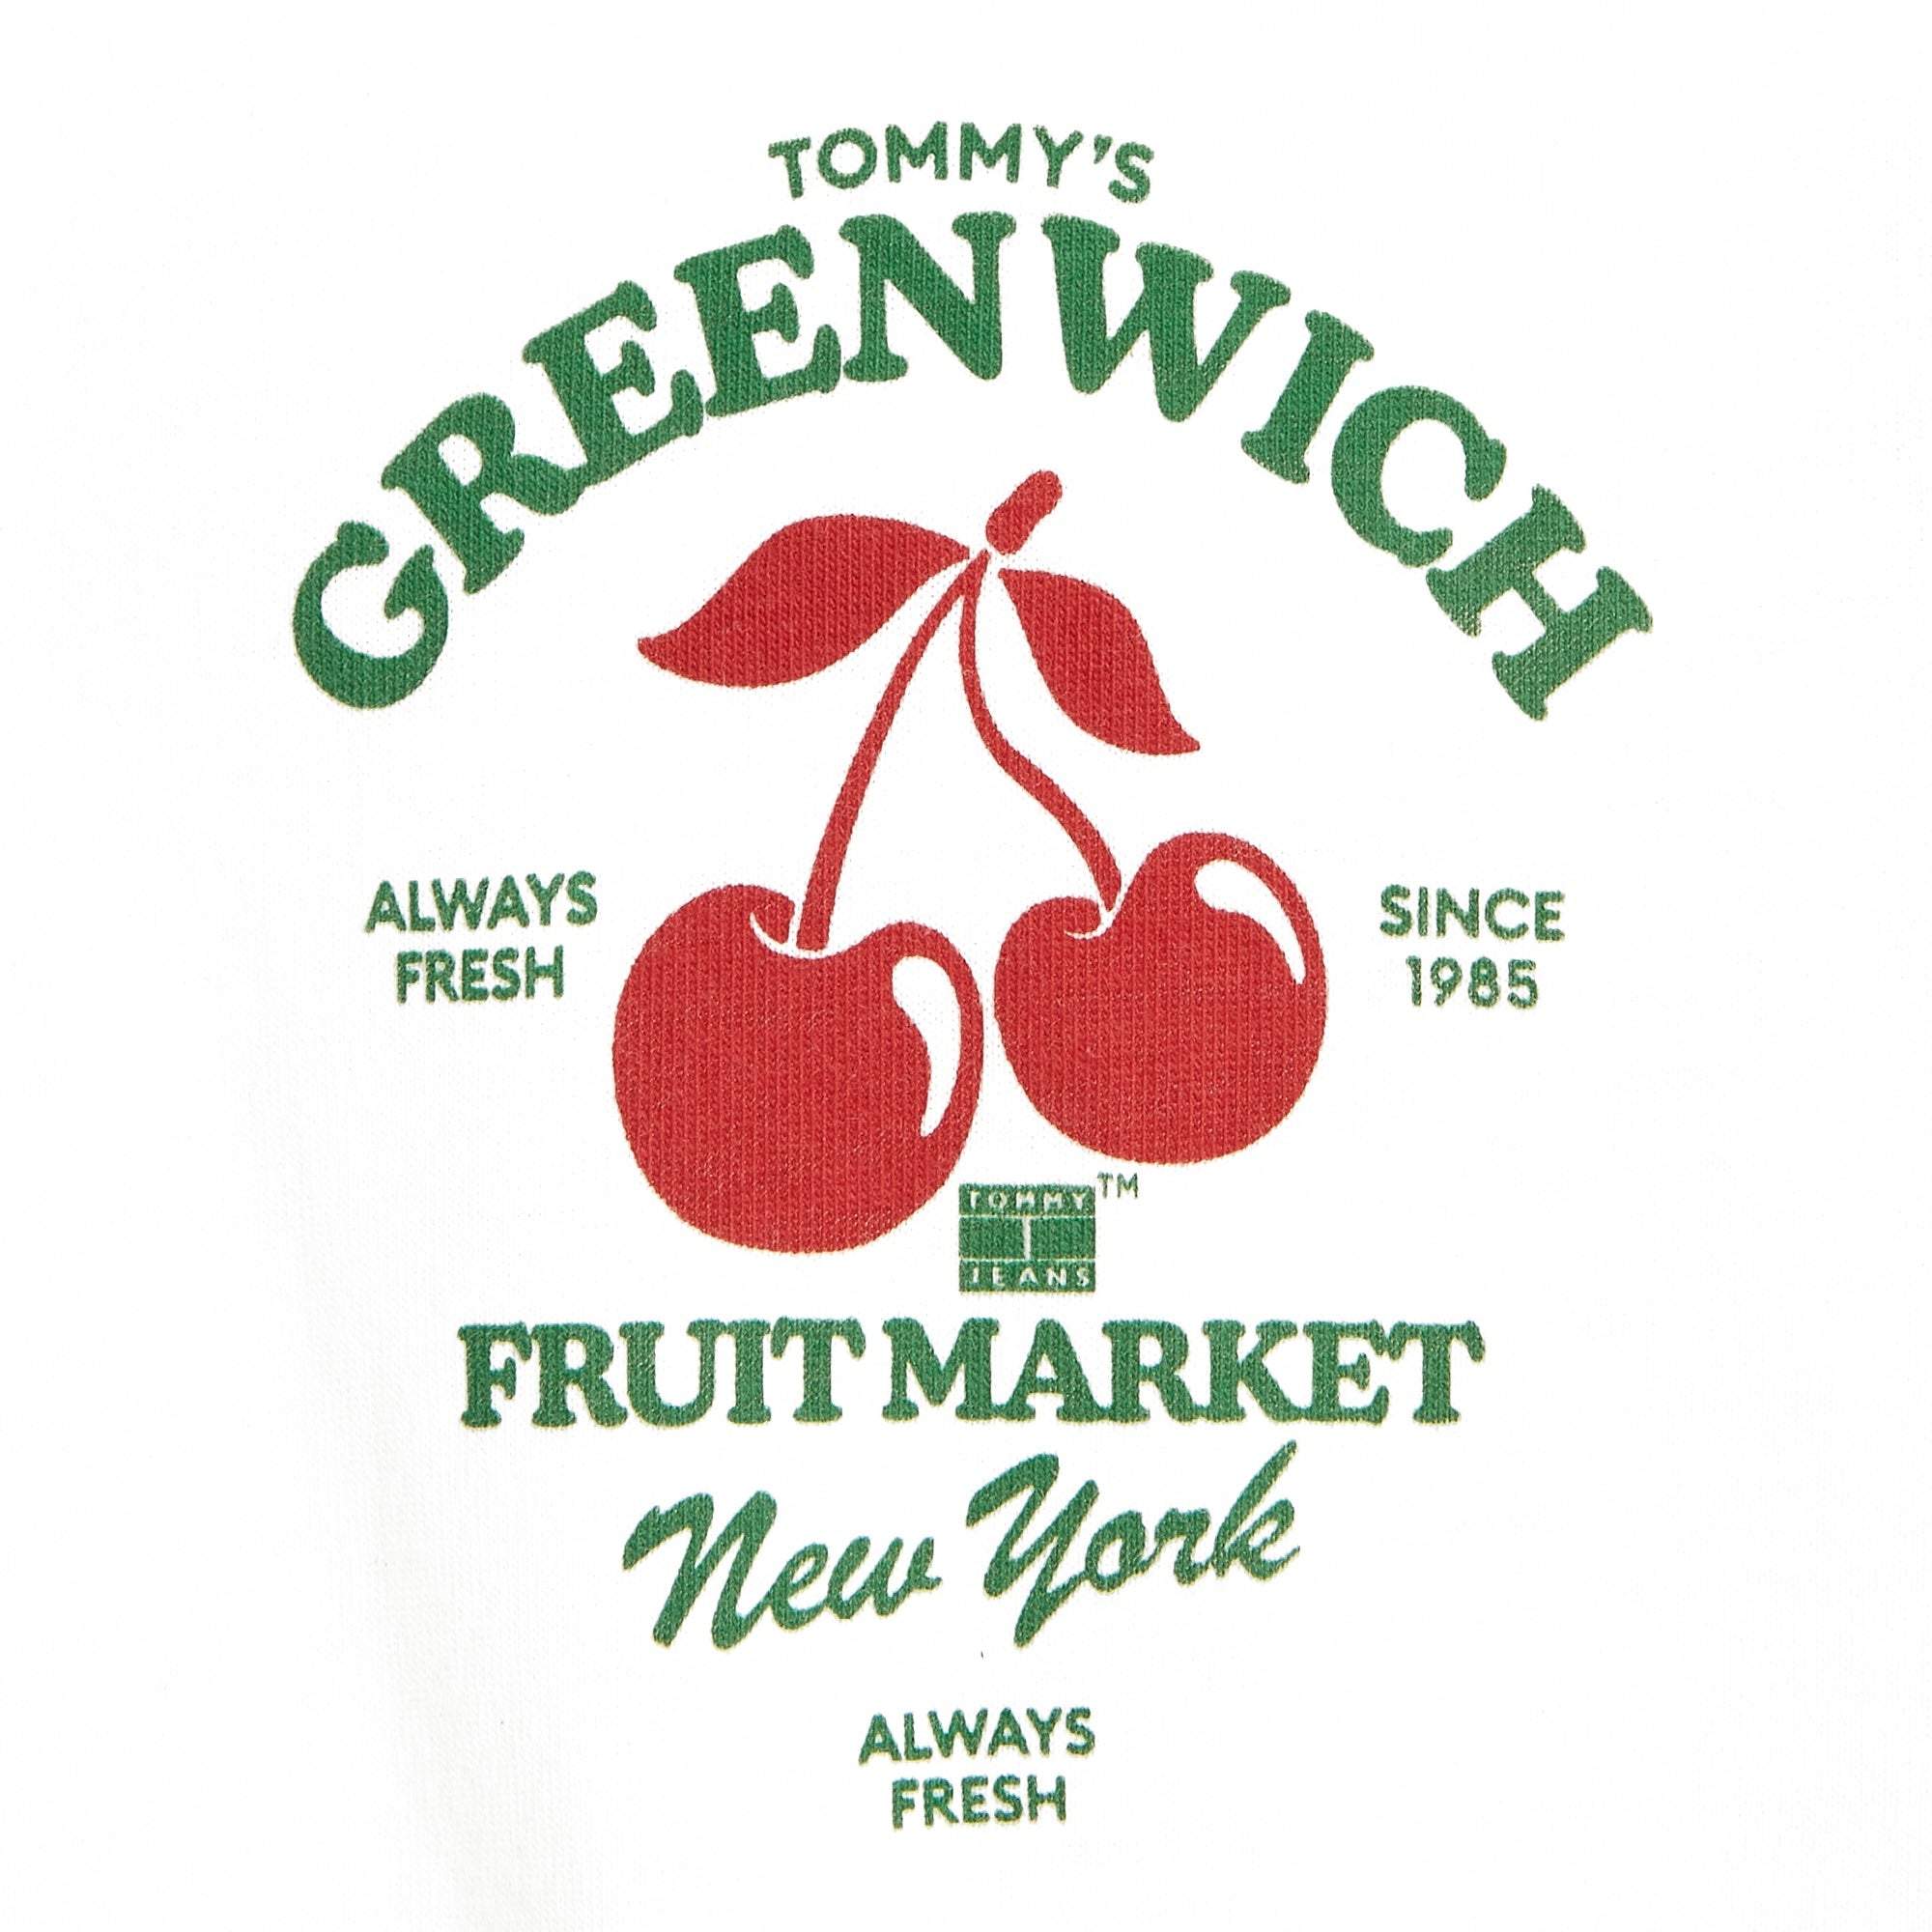 Tommy Jeans Greenwich Fruit Market Graphic T-Shirt - Ancient White